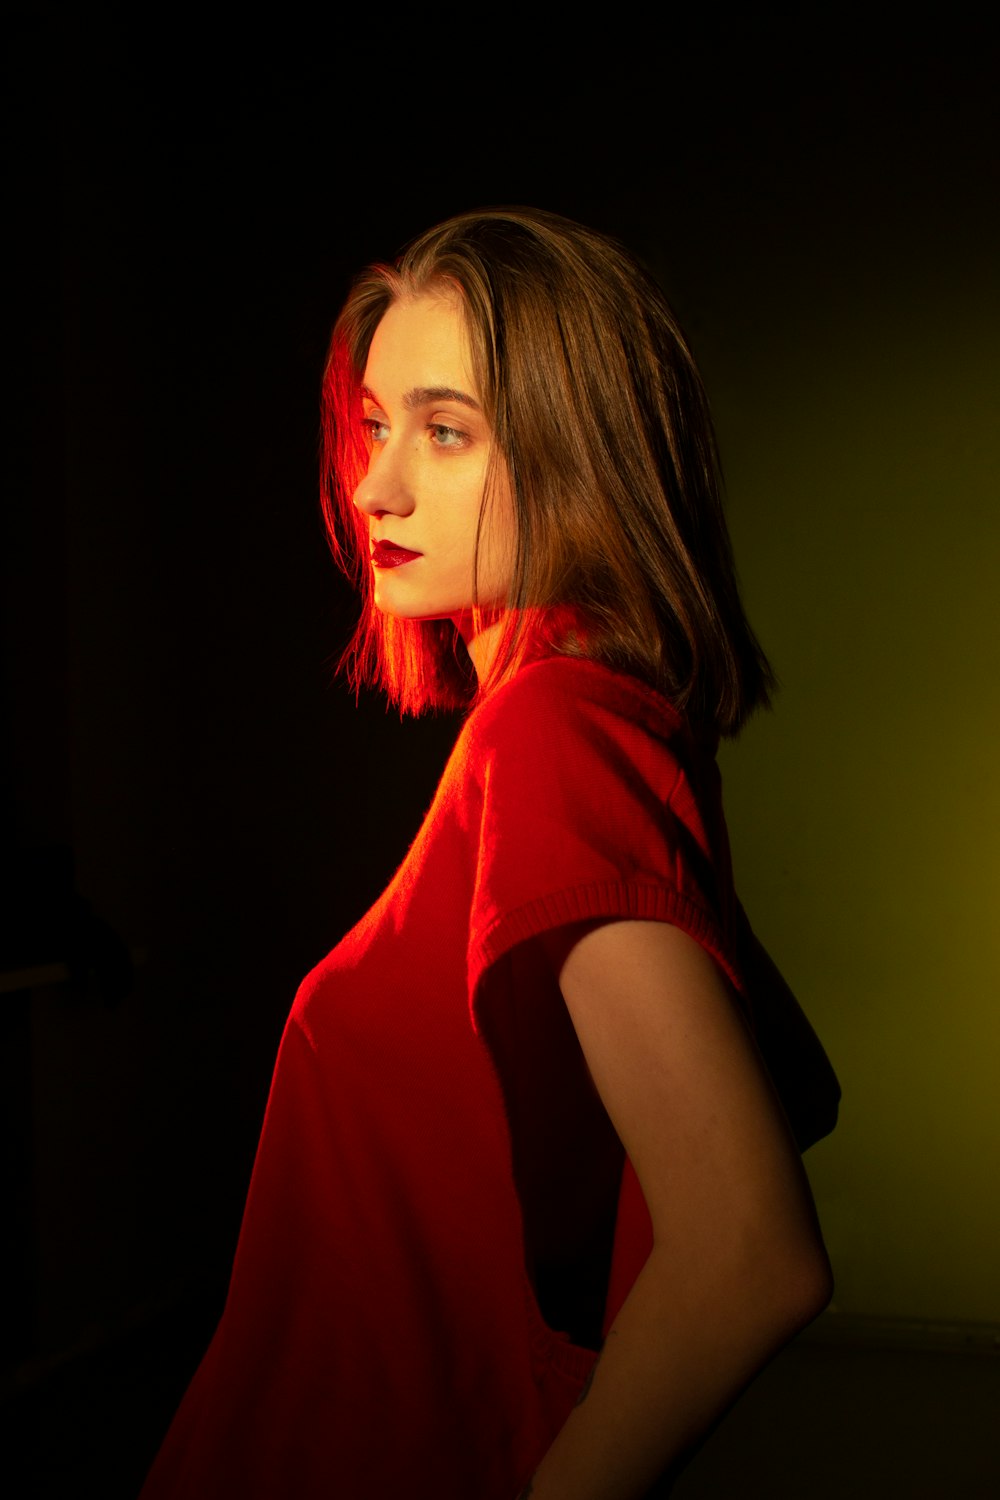 a woman in a red shirt standing in a dark room